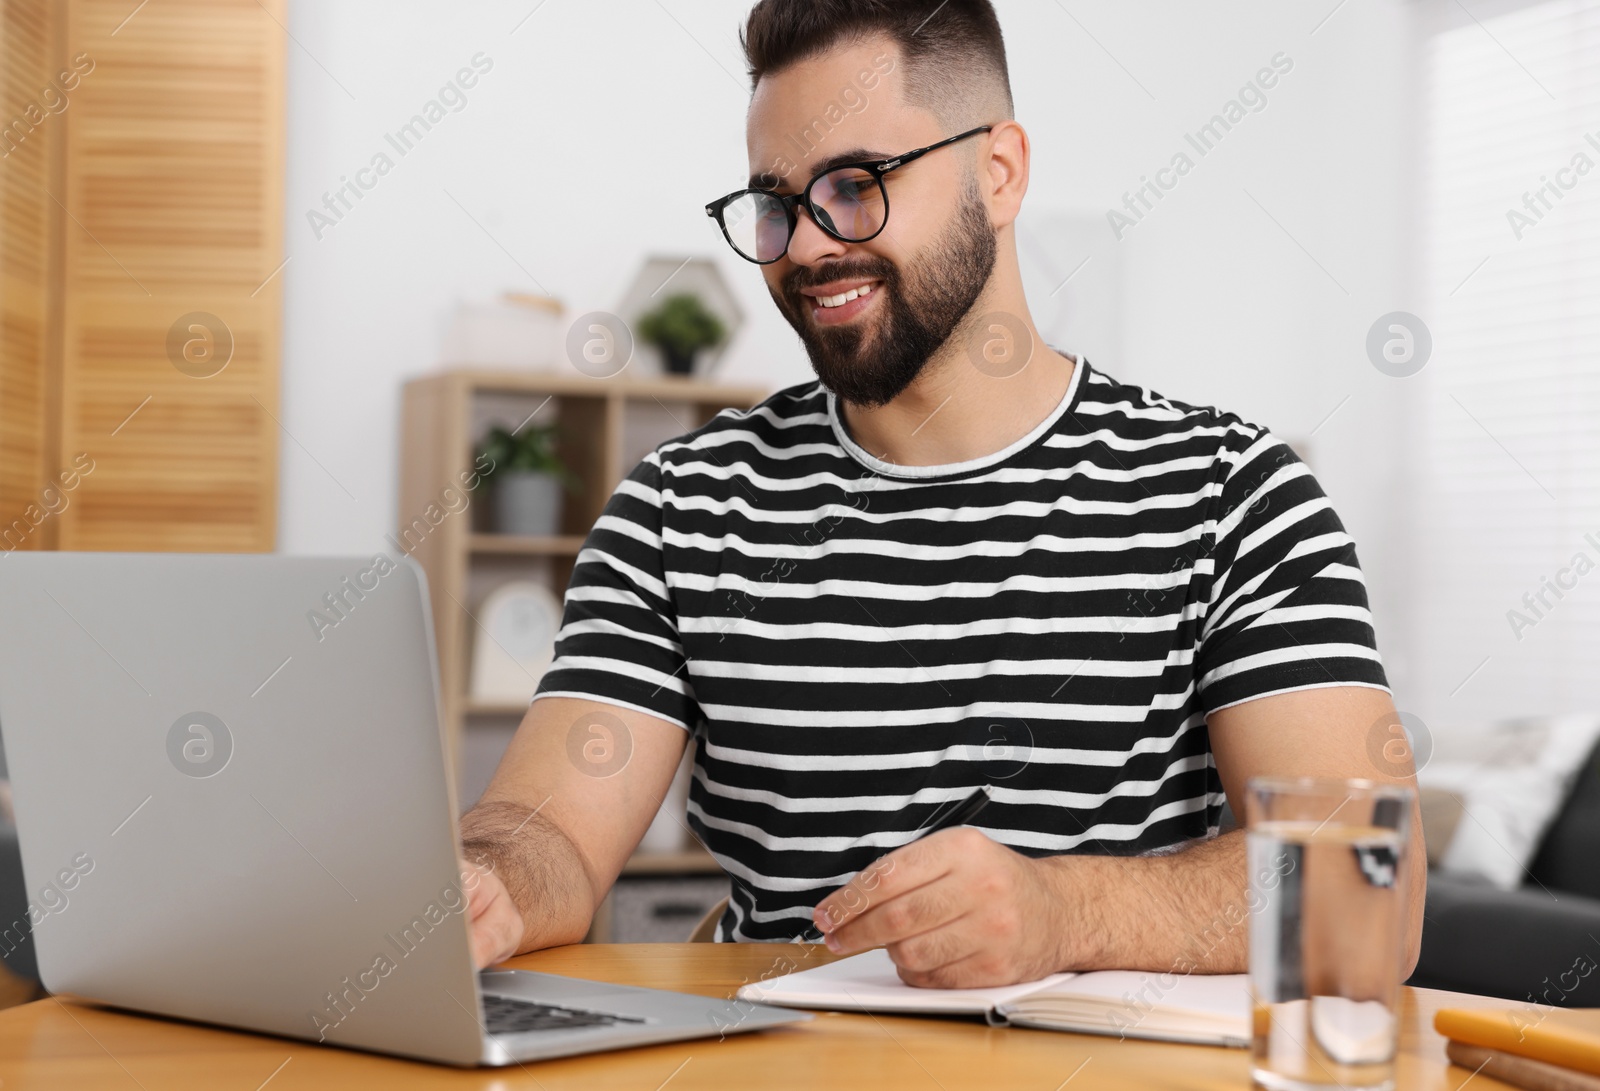 Photo of Young man writing in notebook while working on laptop at wooden table indoors